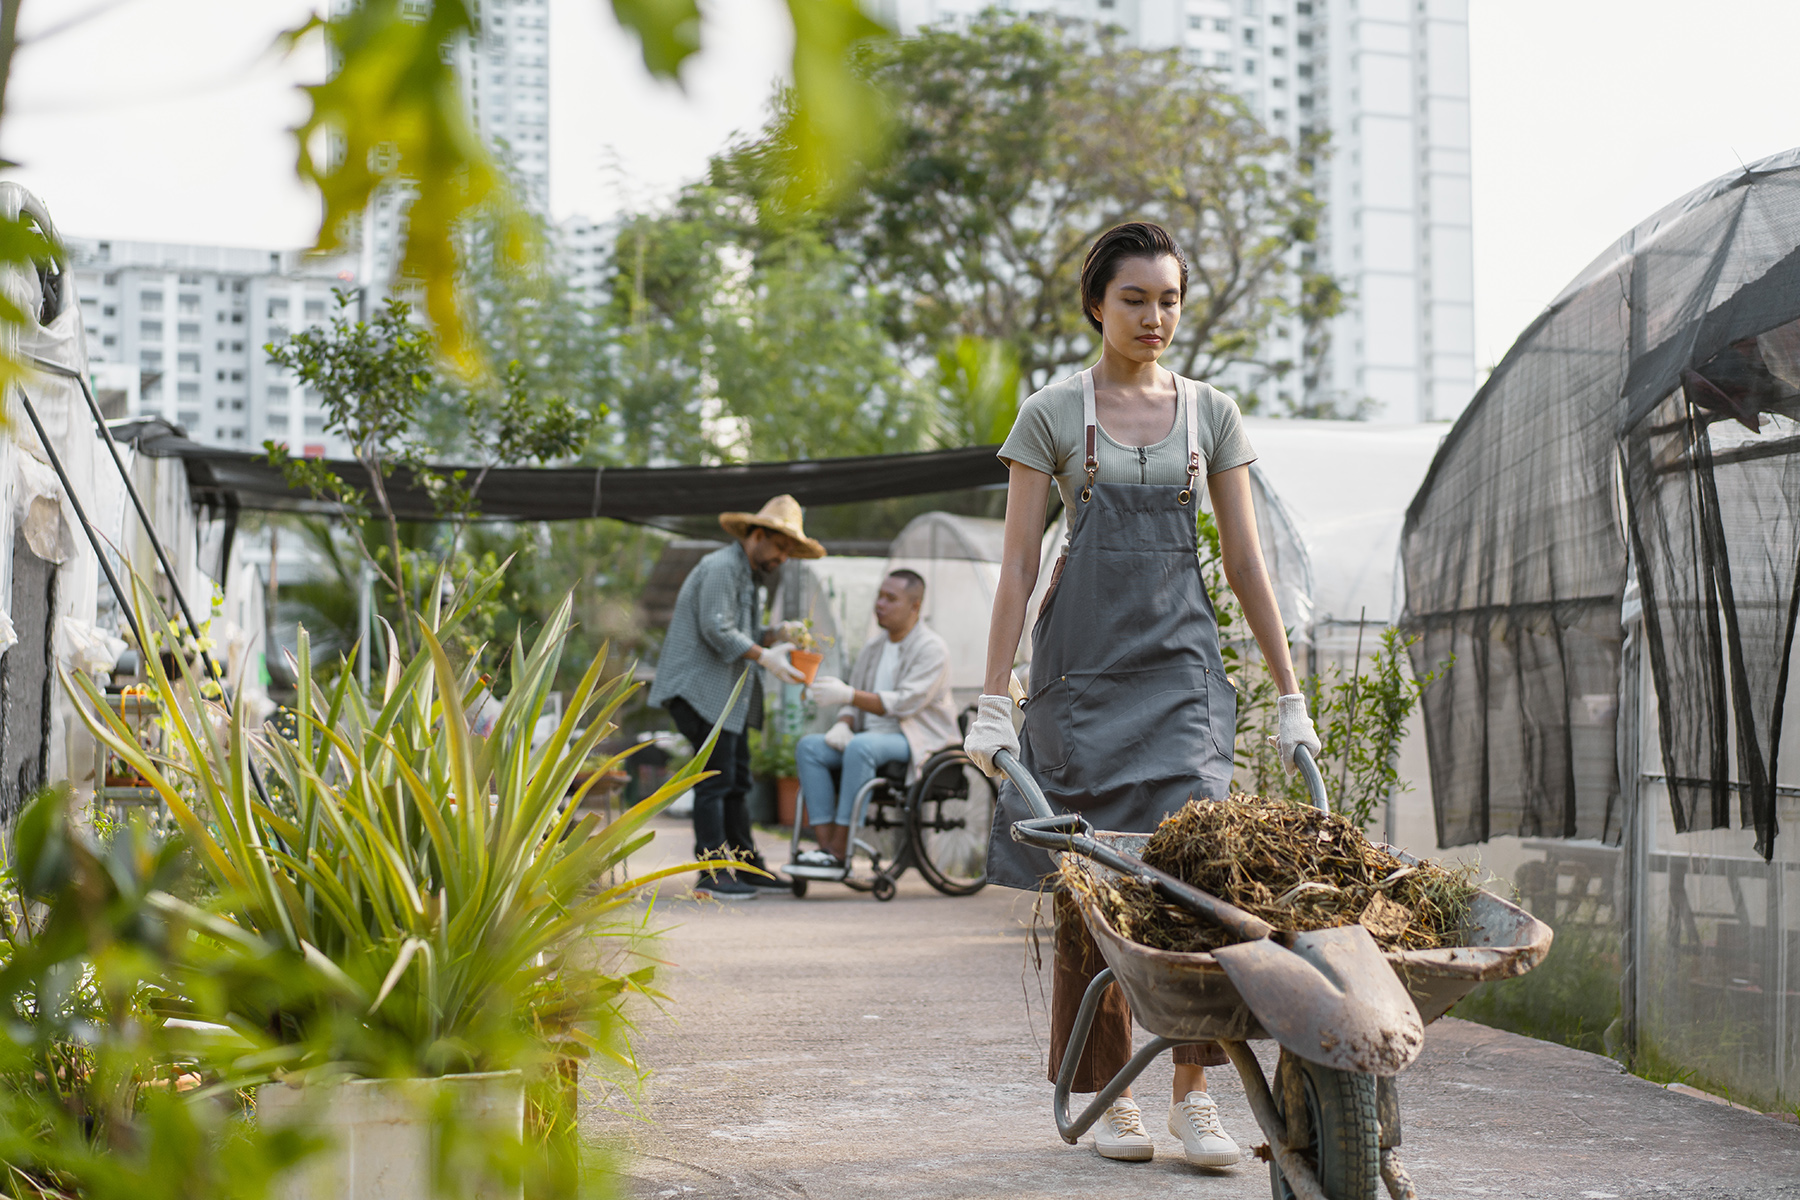 A woman pushes a wheelbarrow filled with compost in an sustainable urban farm in Singapore. in the background another gardener wearing a straw hat chats to another person who uses a wheelchair